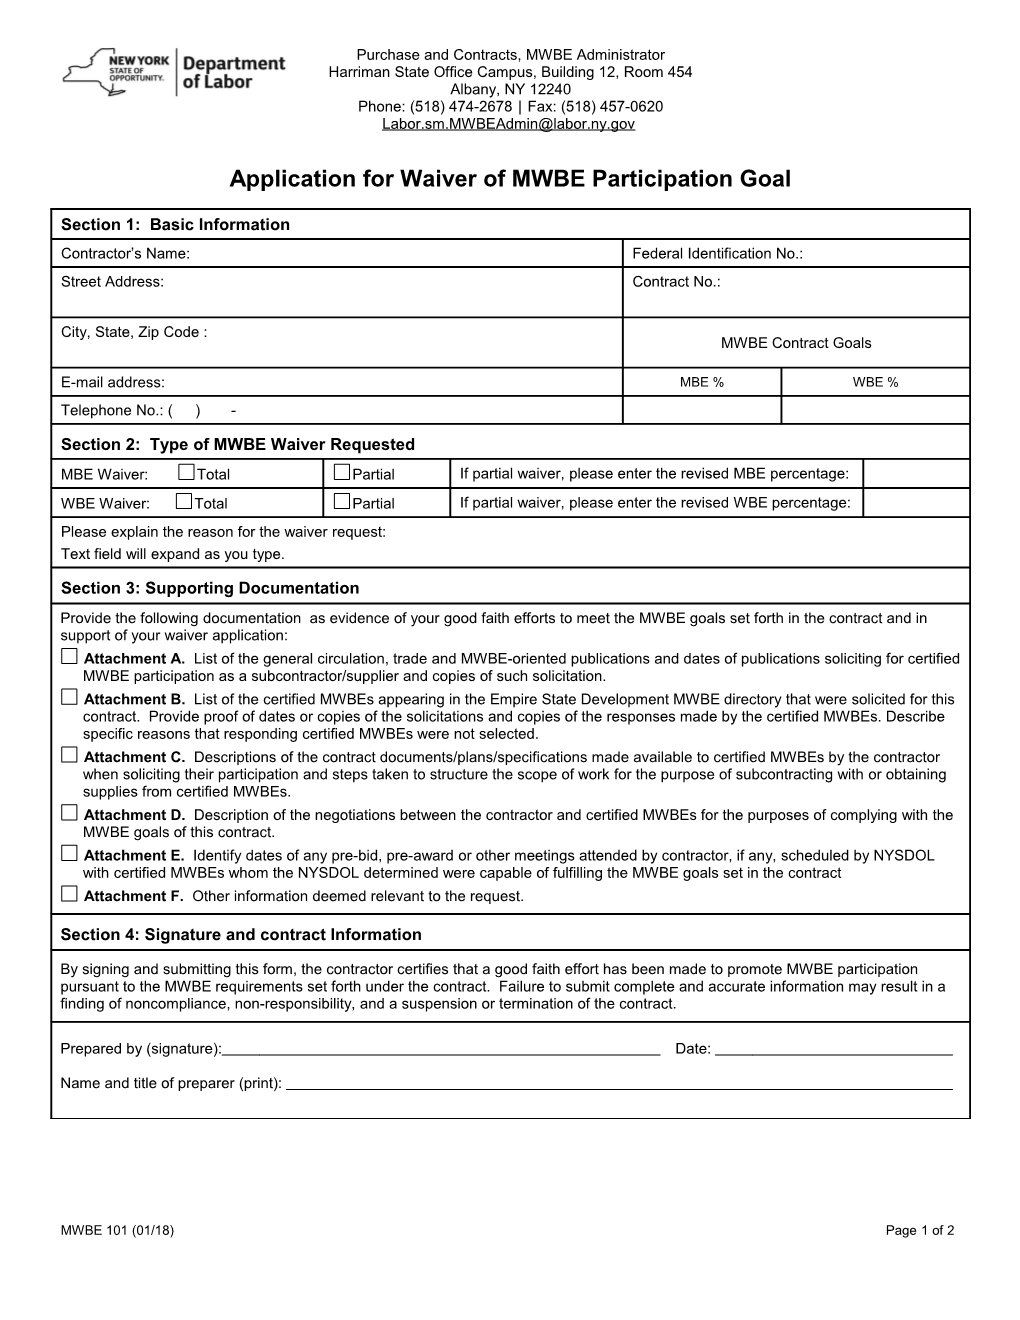 Application for Waiver of MWBE Participation Goal